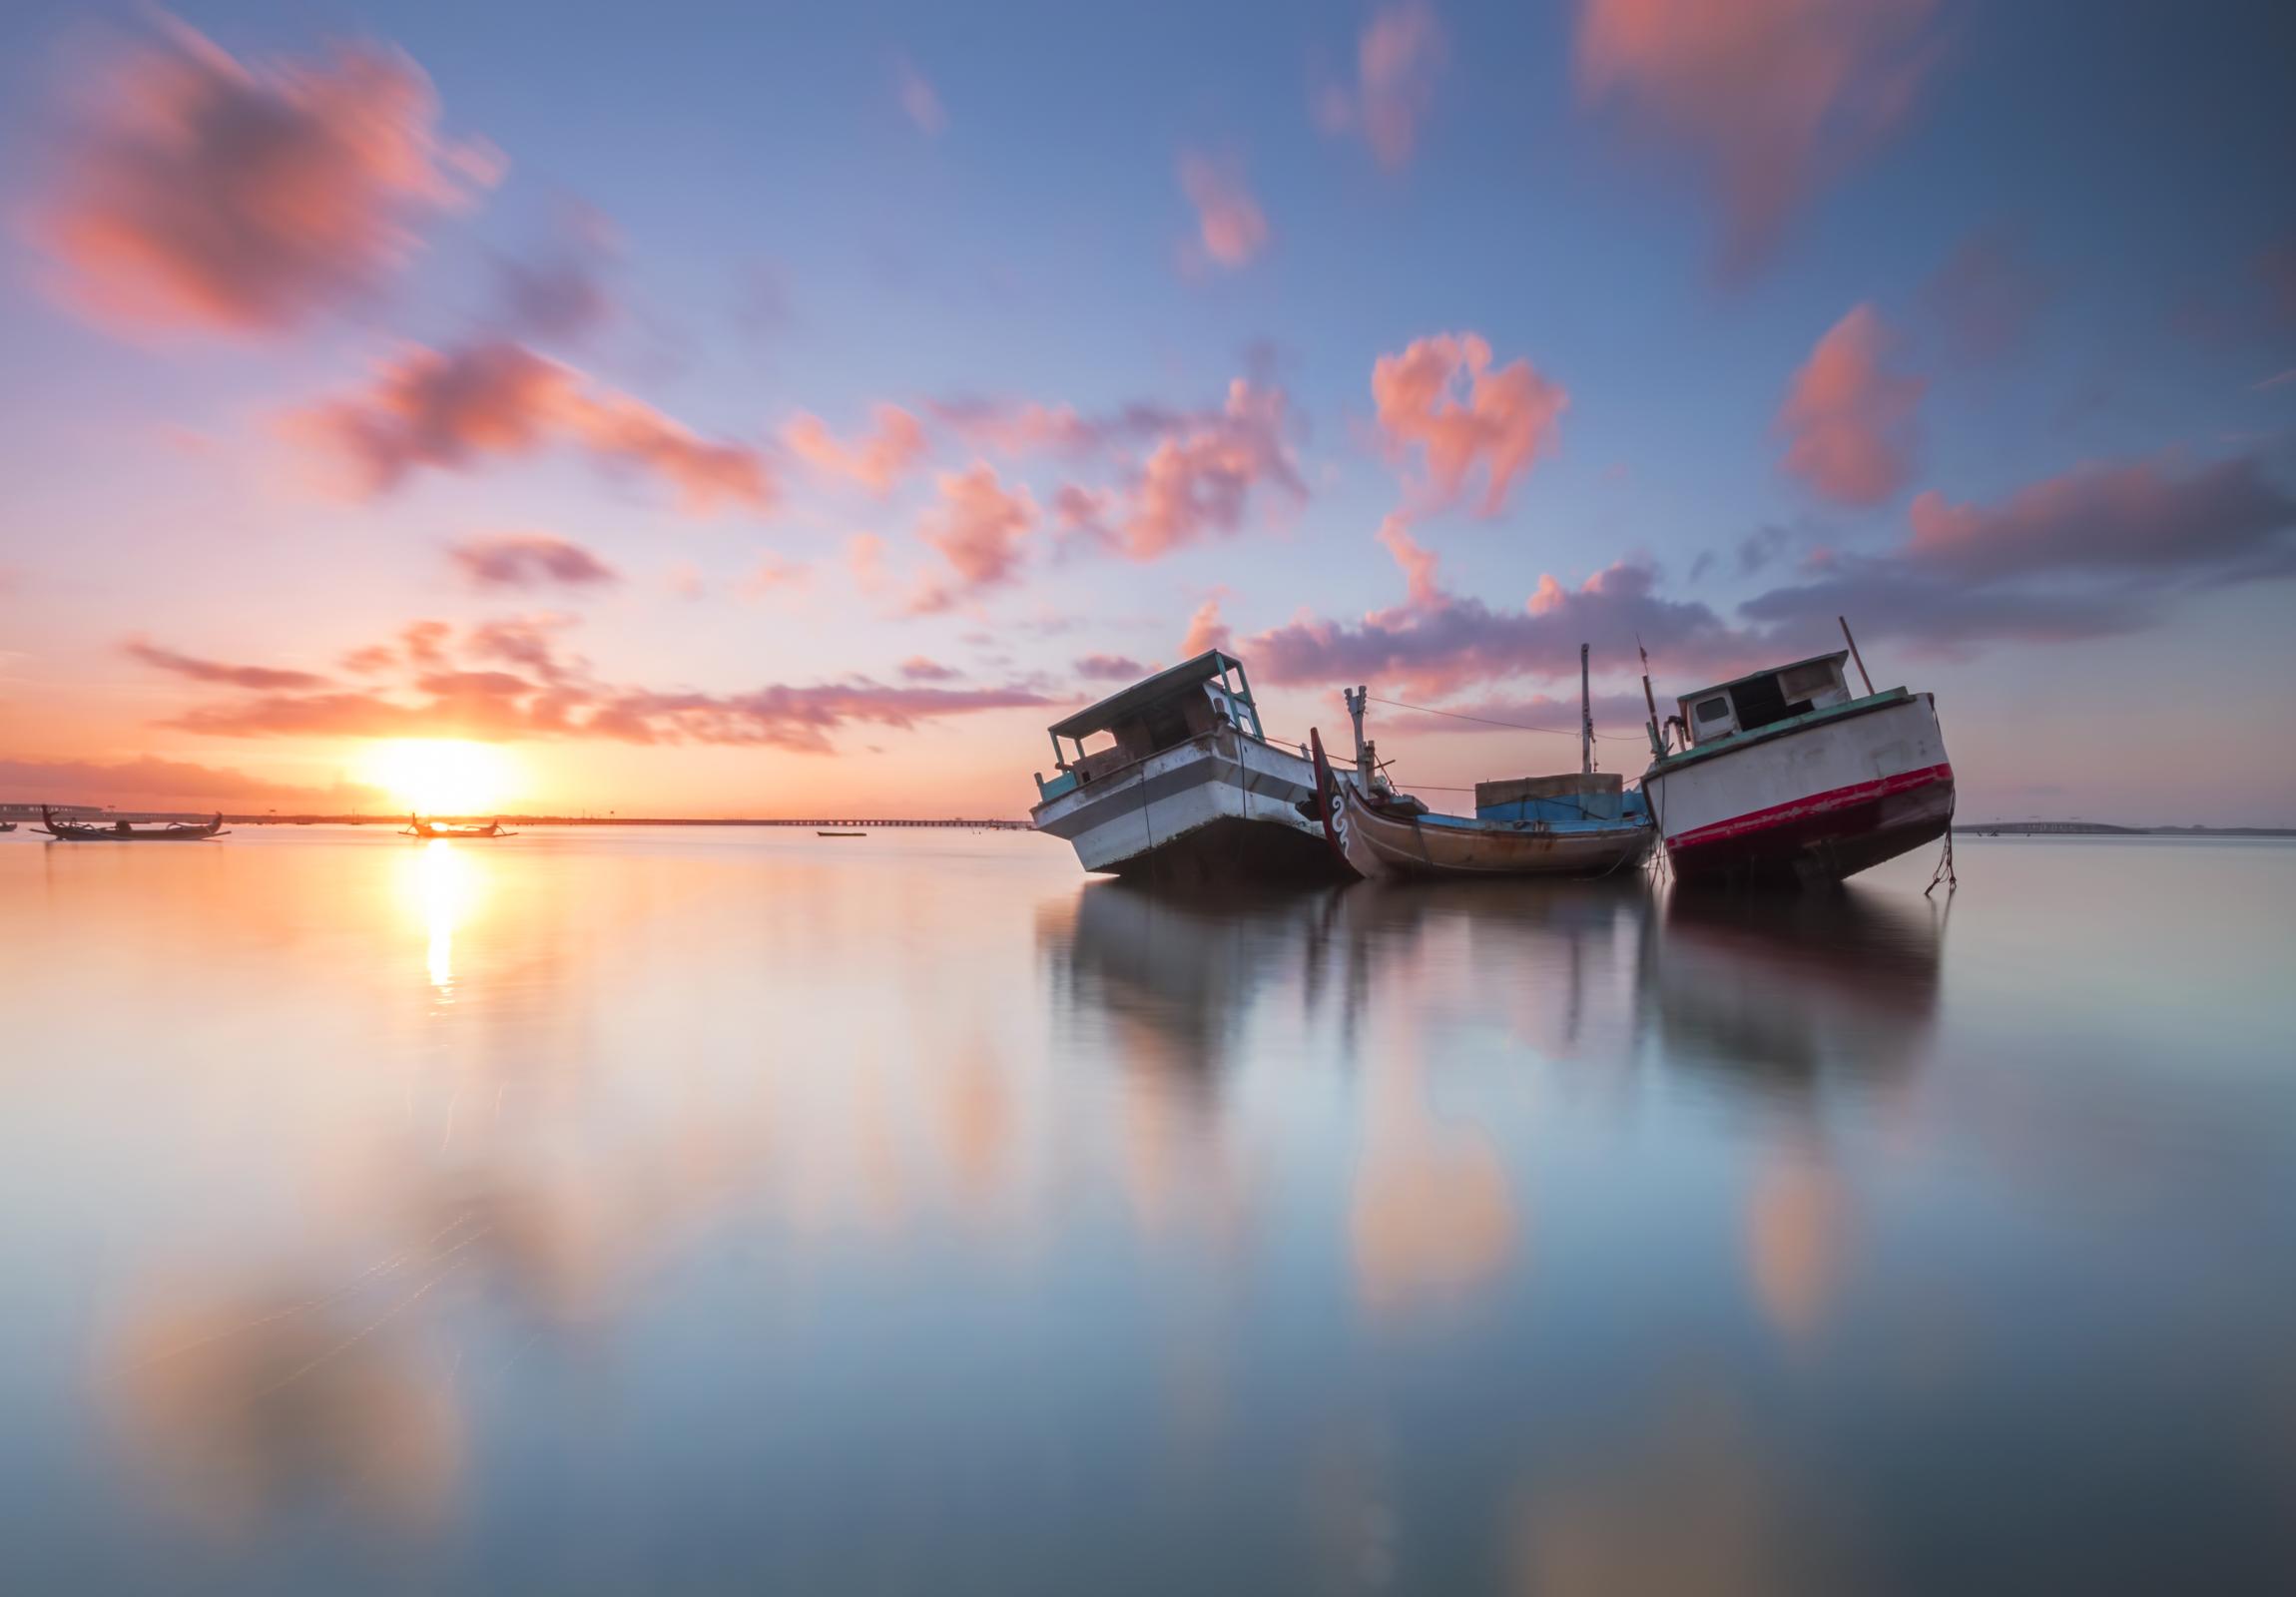 Image of two fishing boats on the water during a sunset